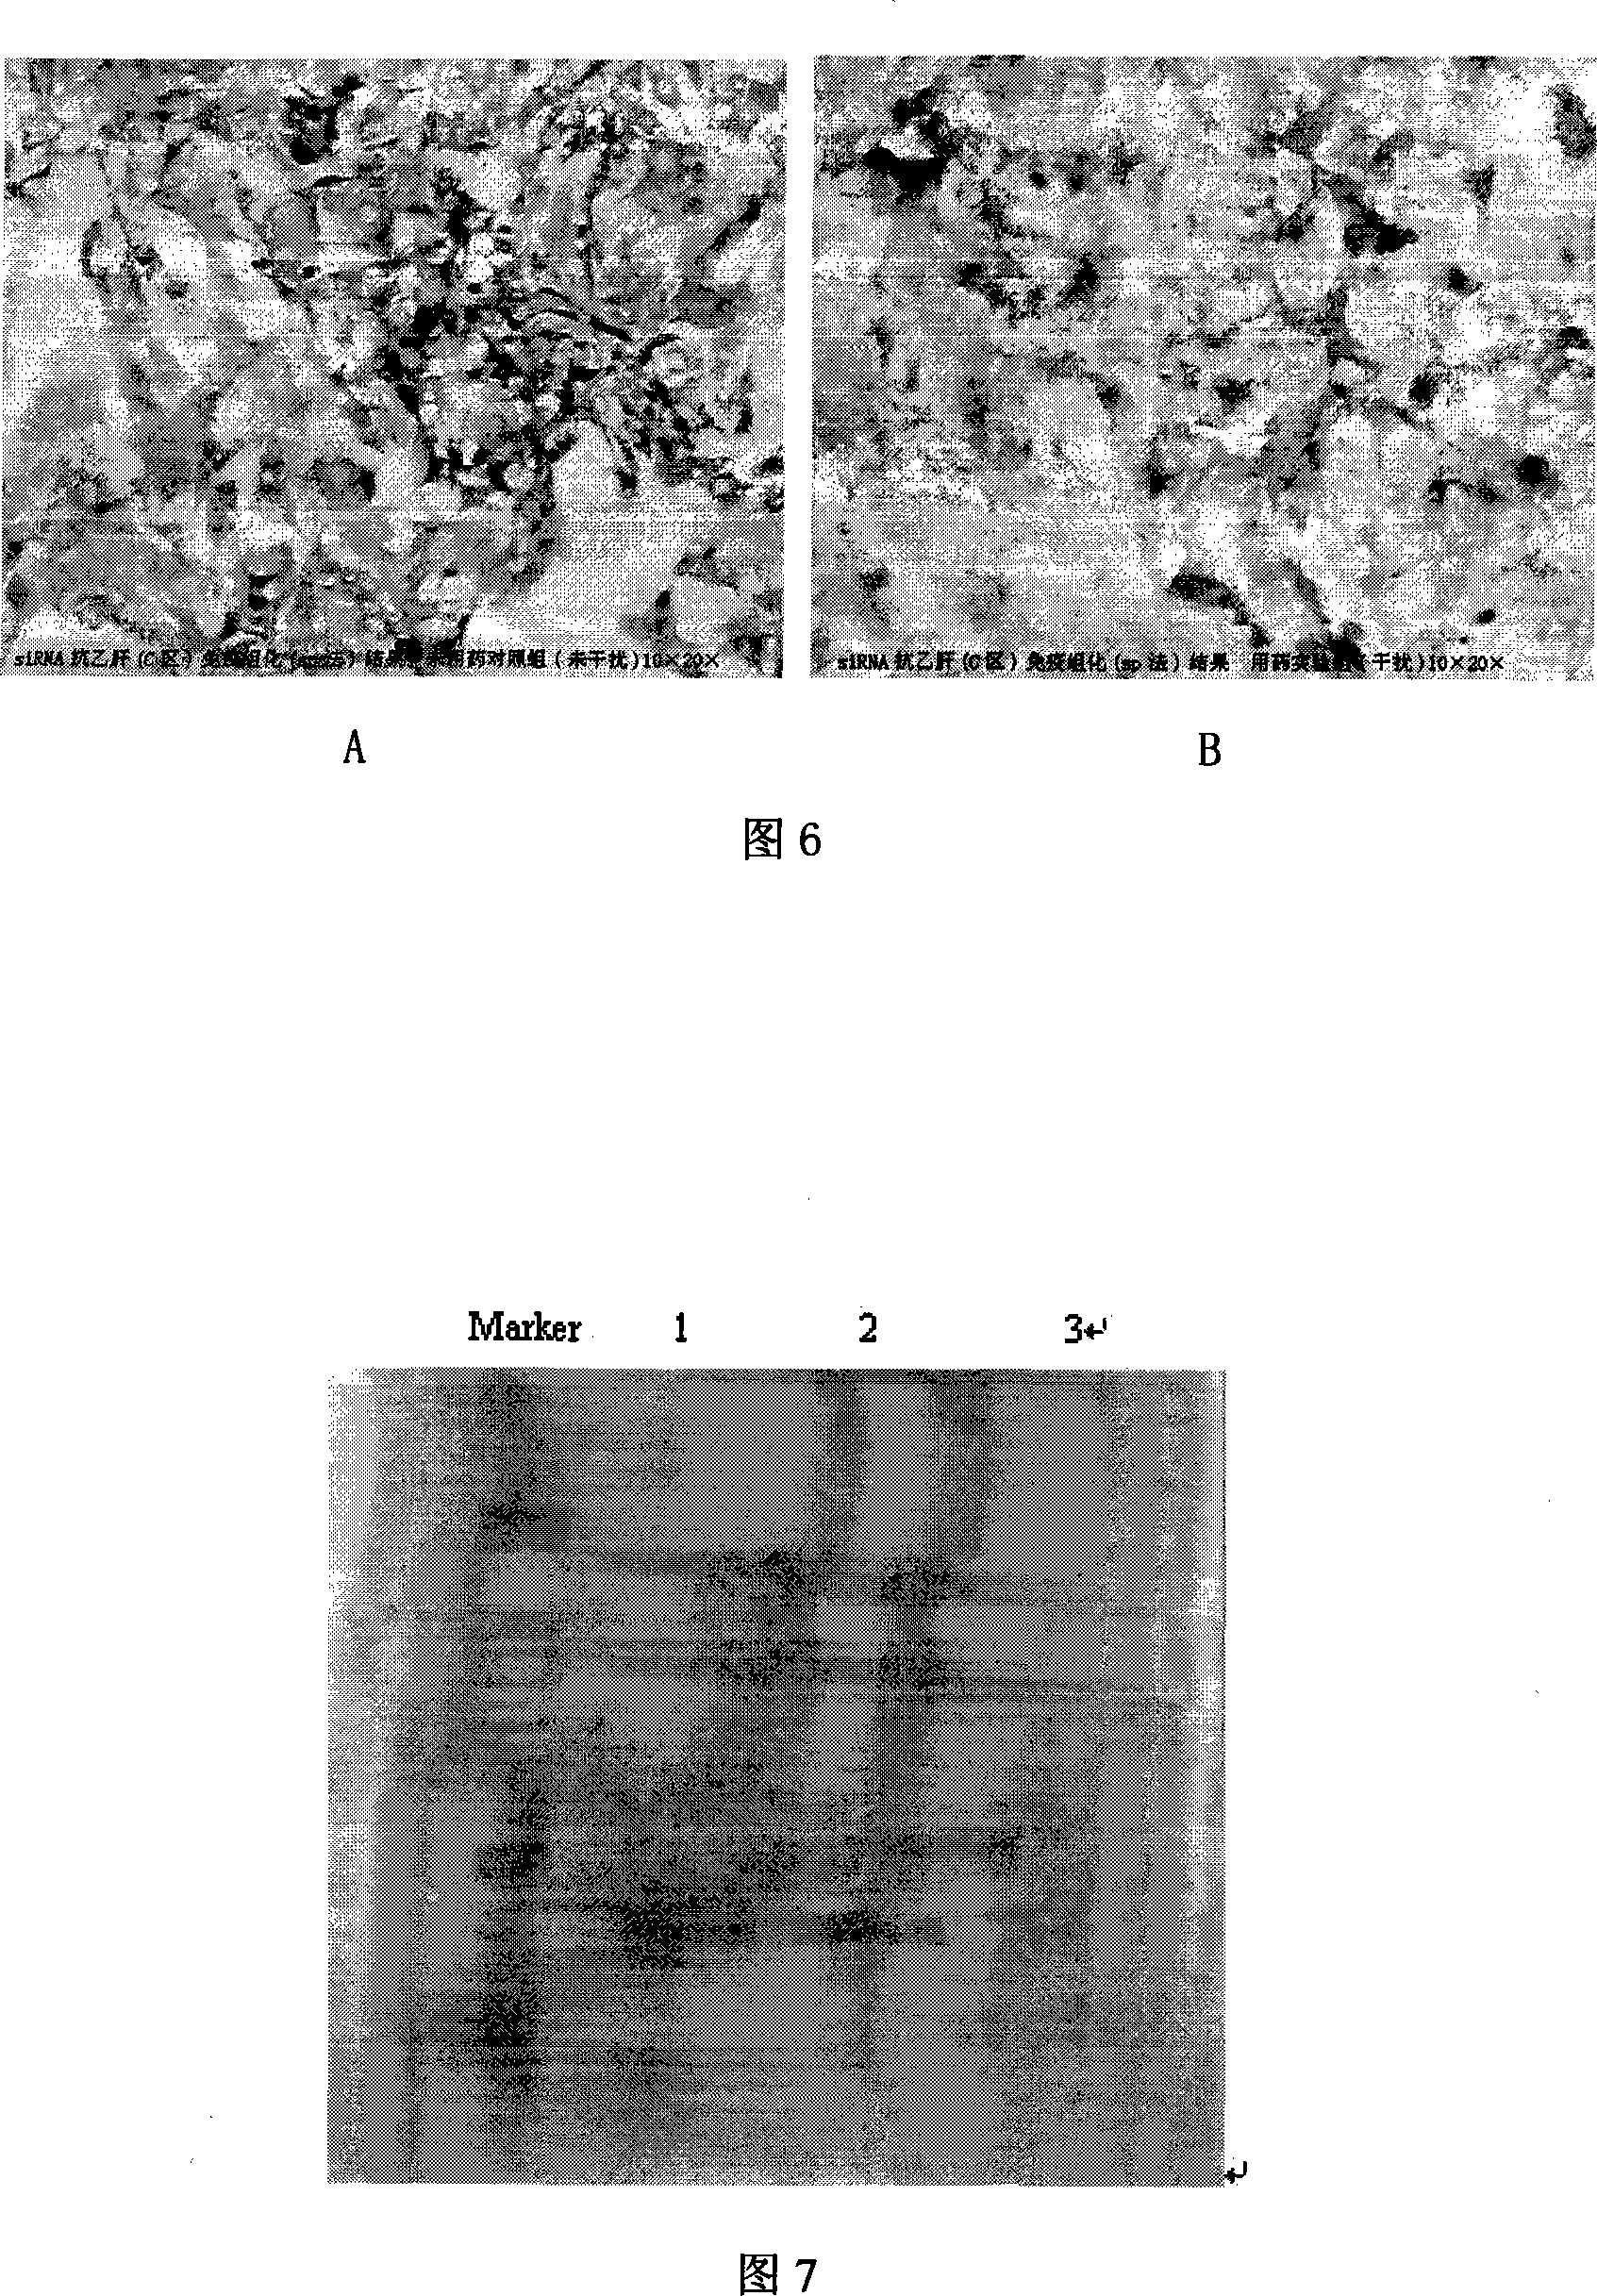 HBV core area resisting siRNA expression template and application